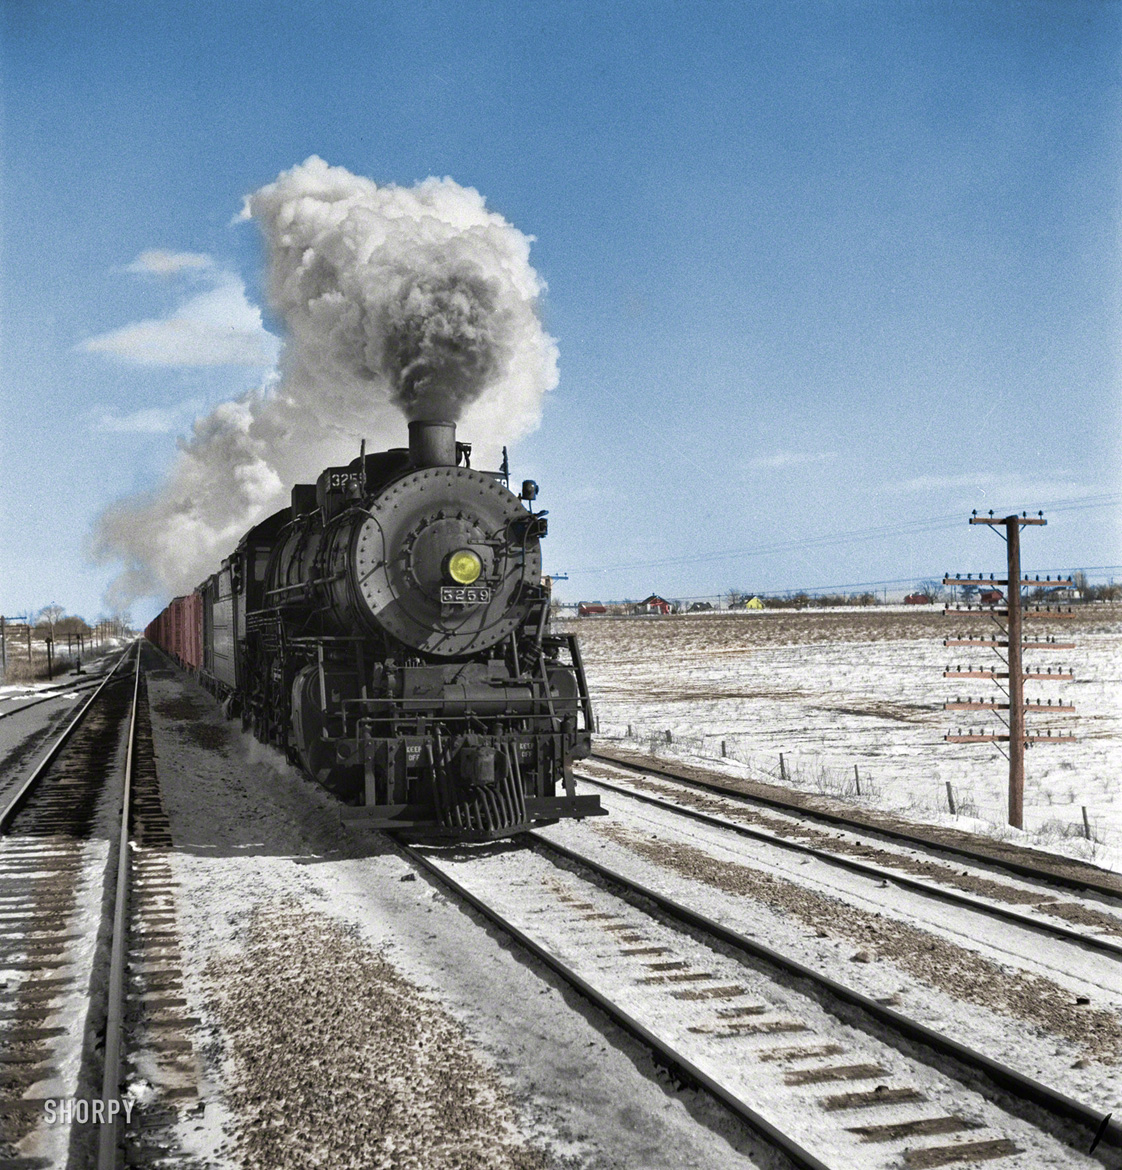 Colorized from this Shorpy original. Looks cold out there. View full size.